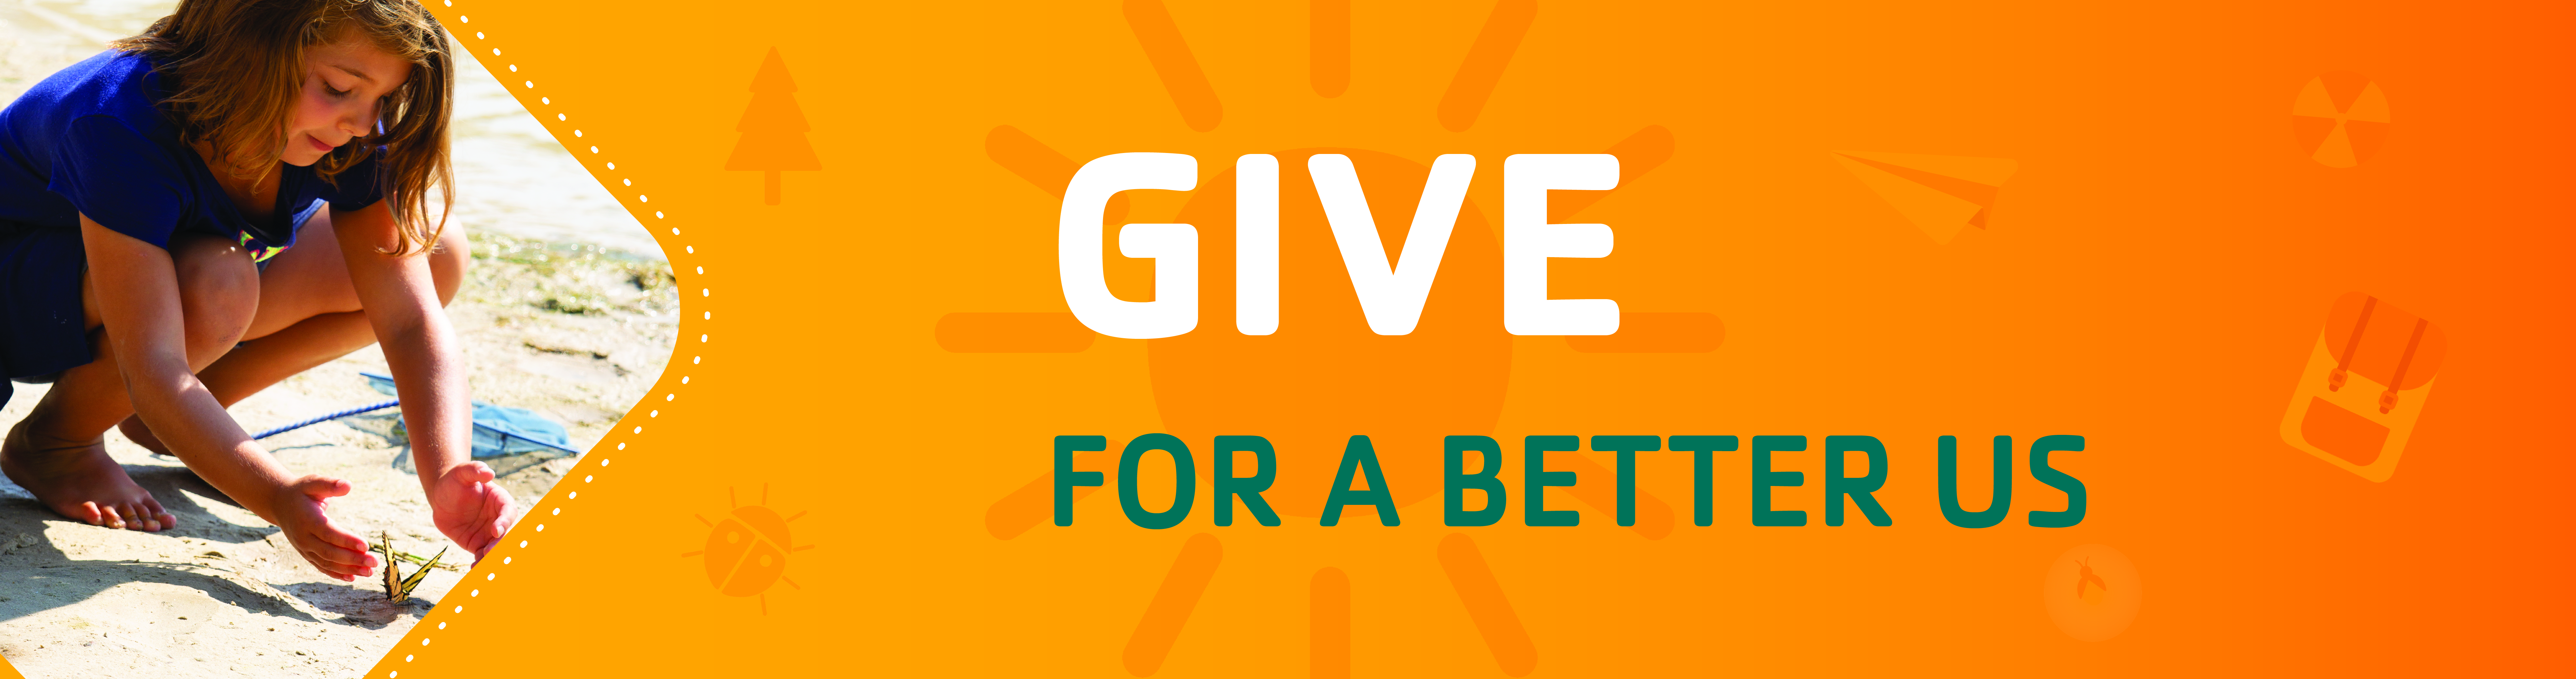 Donate - Give for a Better Us Orange Graphic